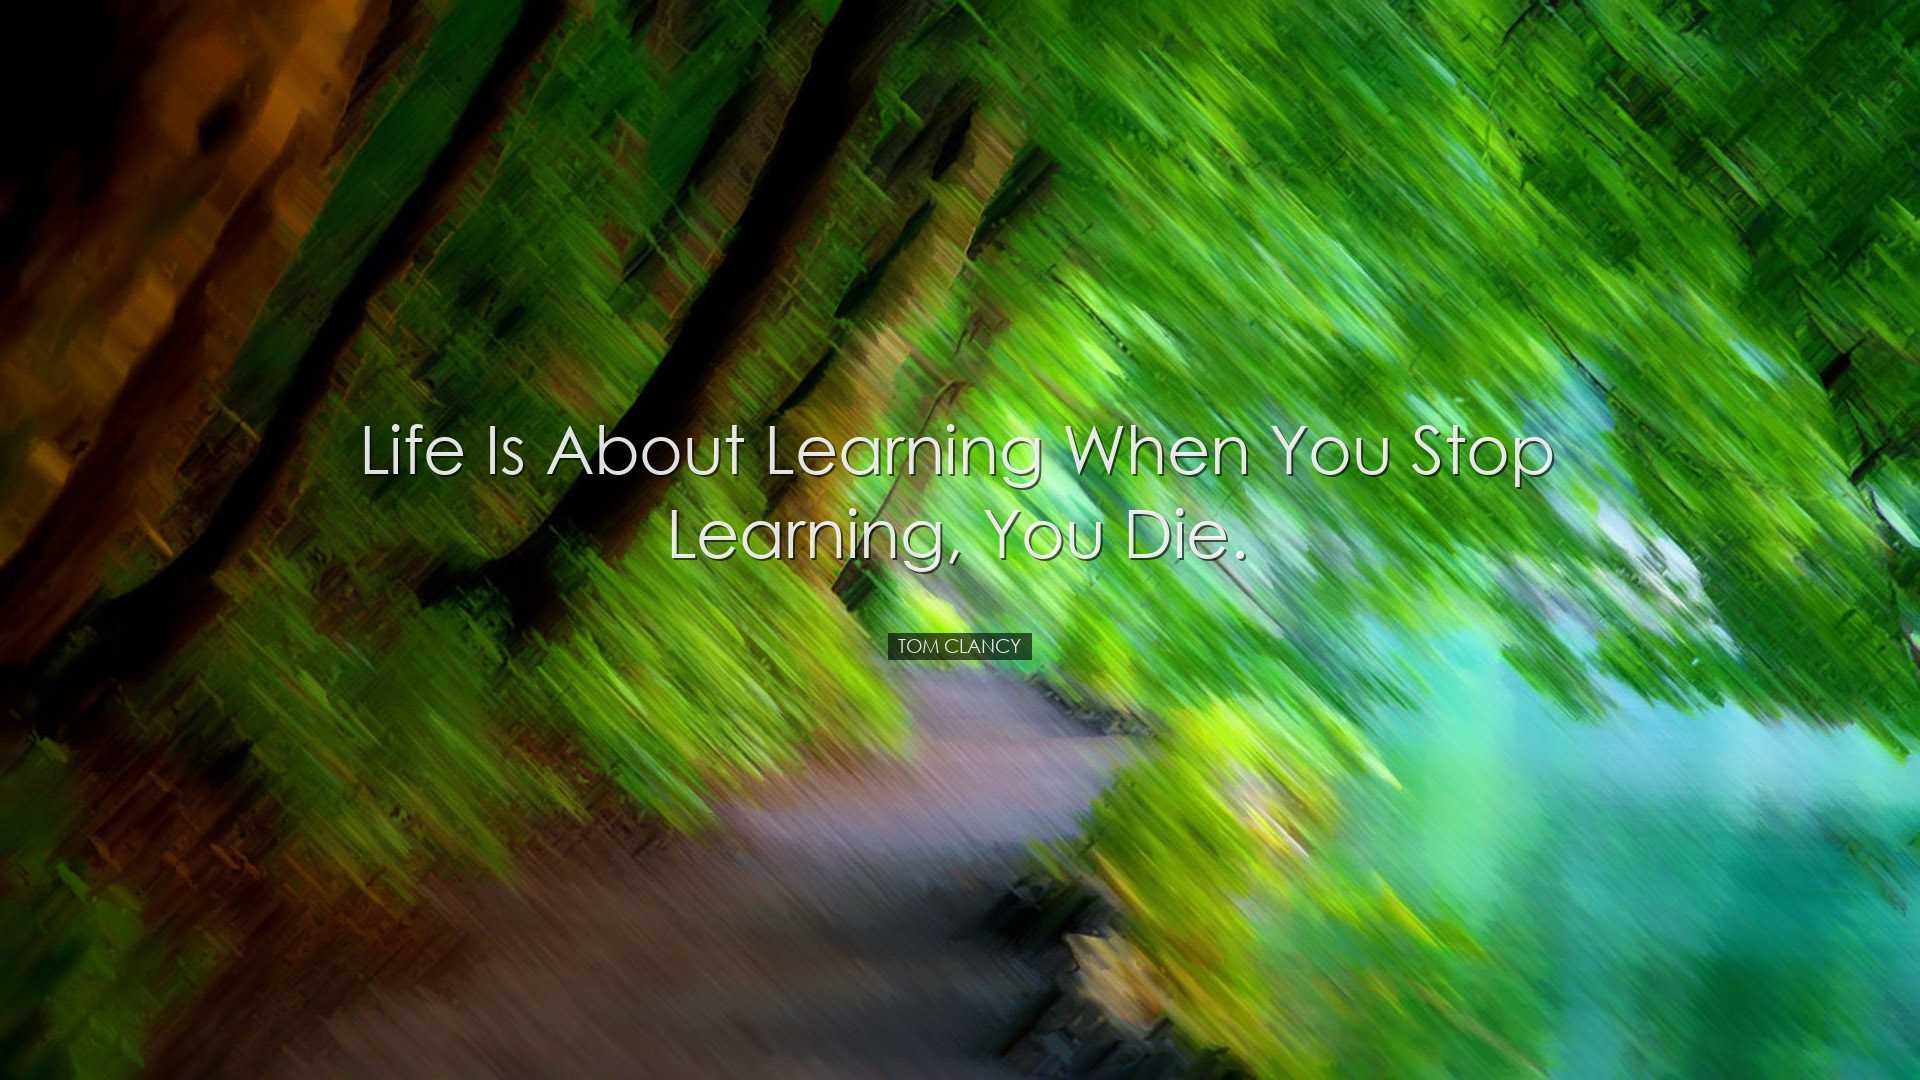 Life is about learning when you stop learning, you die. - Tom Clan